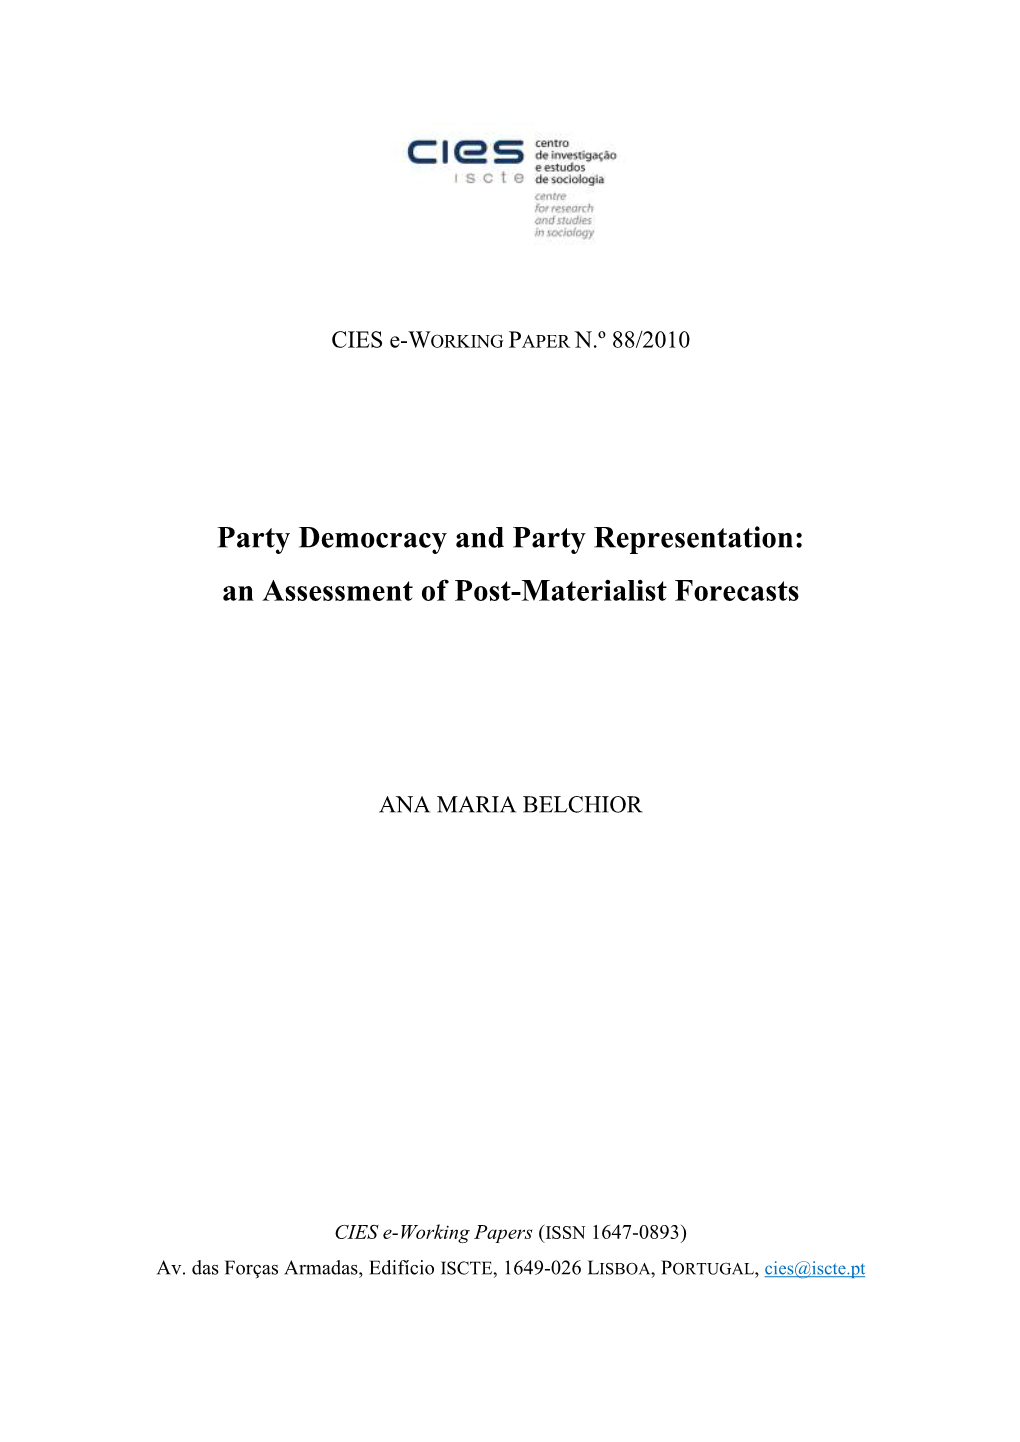 Perspectives on Mps Political Representation: an Assessment of Post